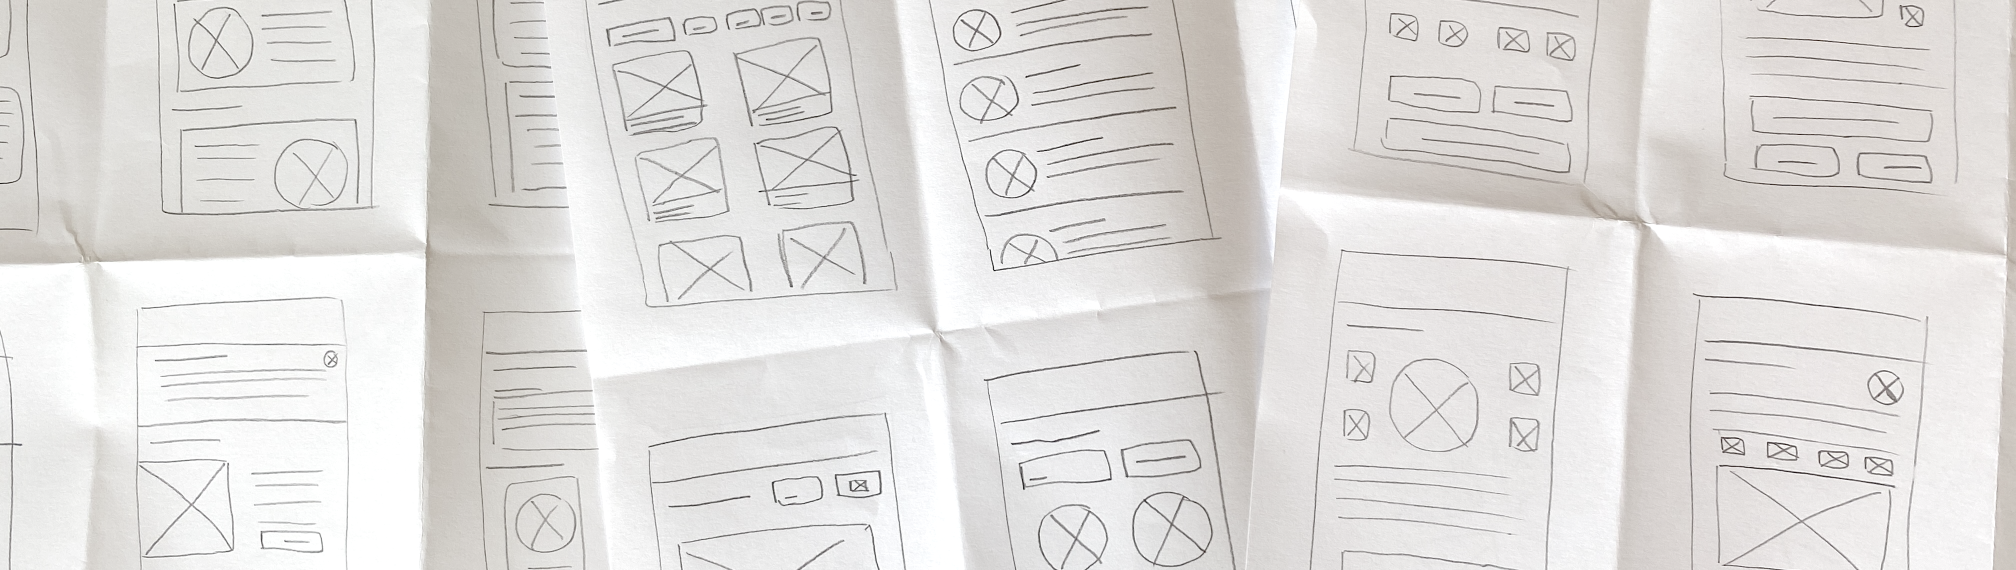 Paper with rough sketches of wireframes